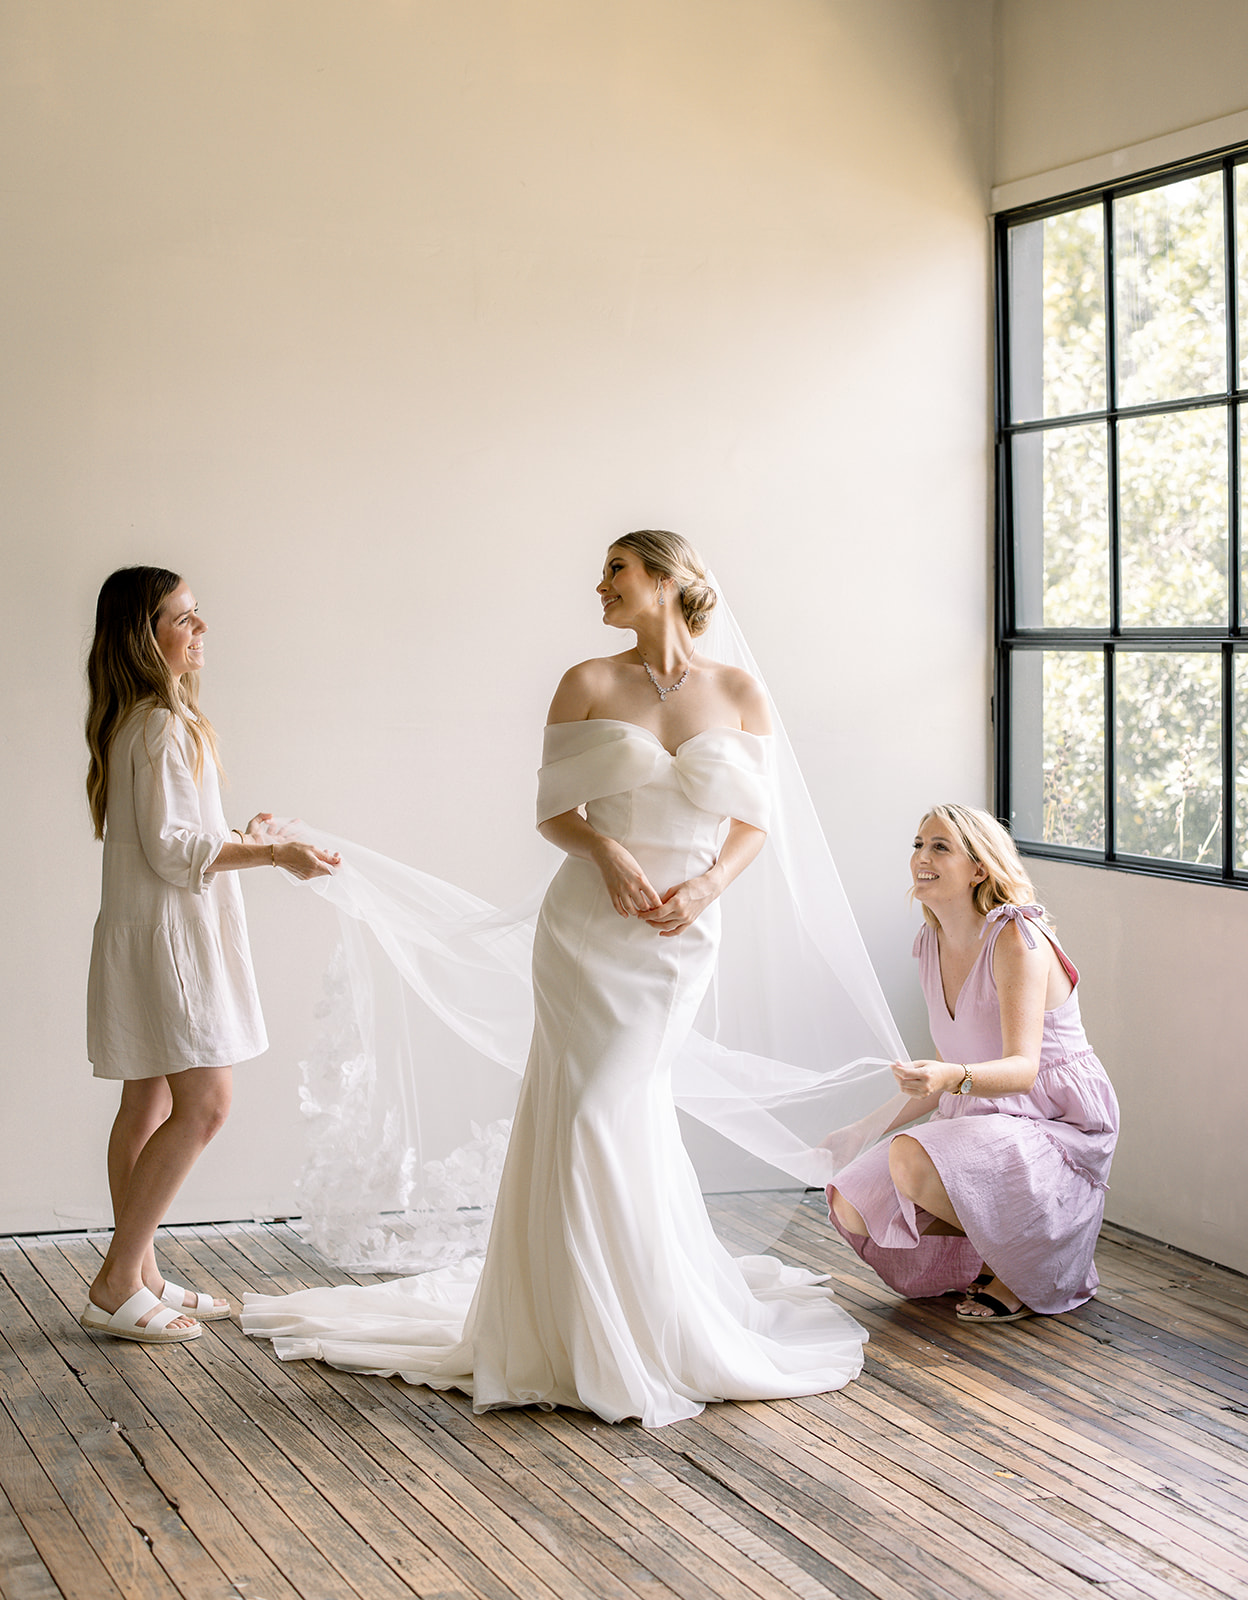 Two women help the bride get ready near to the window